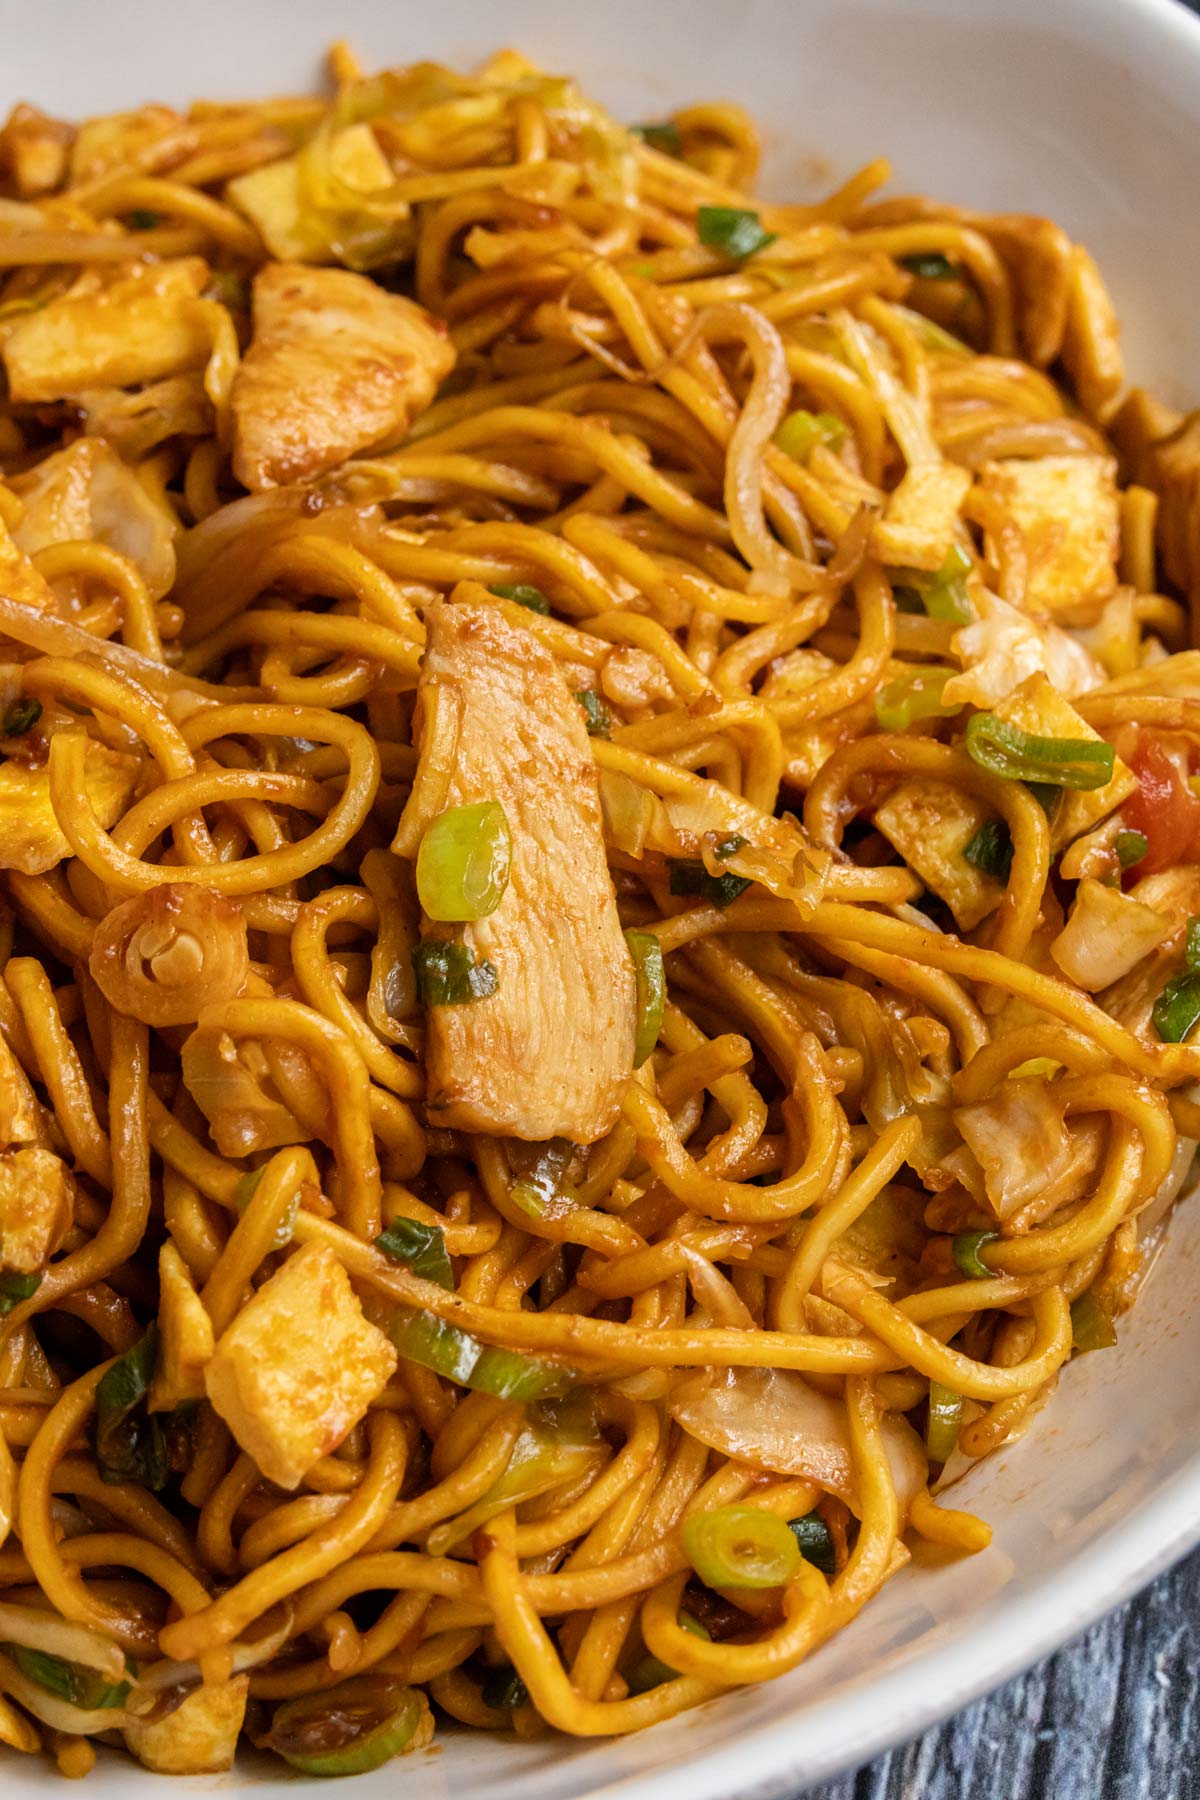 Indonesian stir-fried noodles with sliced chicken, scallions, omelet, cabbage and bean sprouts.